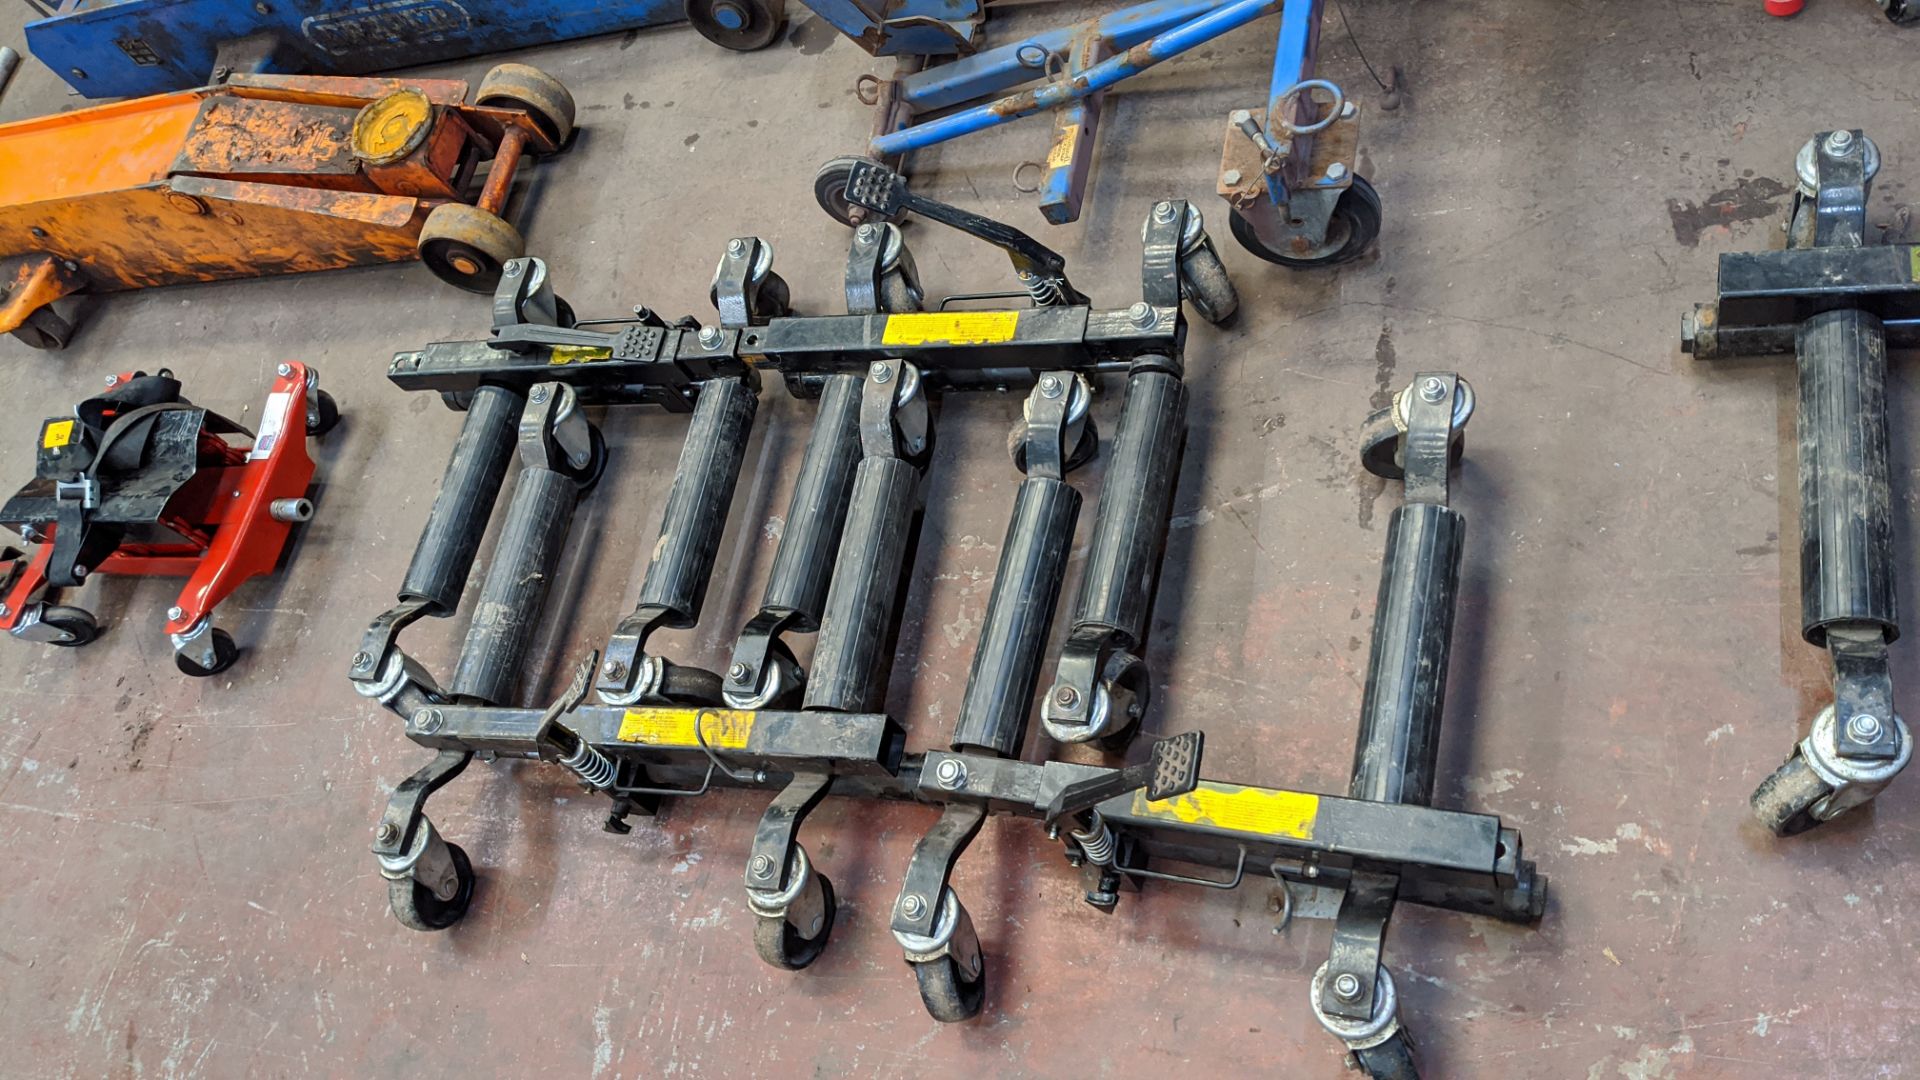 2 off sets of 4 hydraulic vehicle positioning jacks, max. capacity 1500lbs i.e. 8 jacks in total. - Image 4 of 7